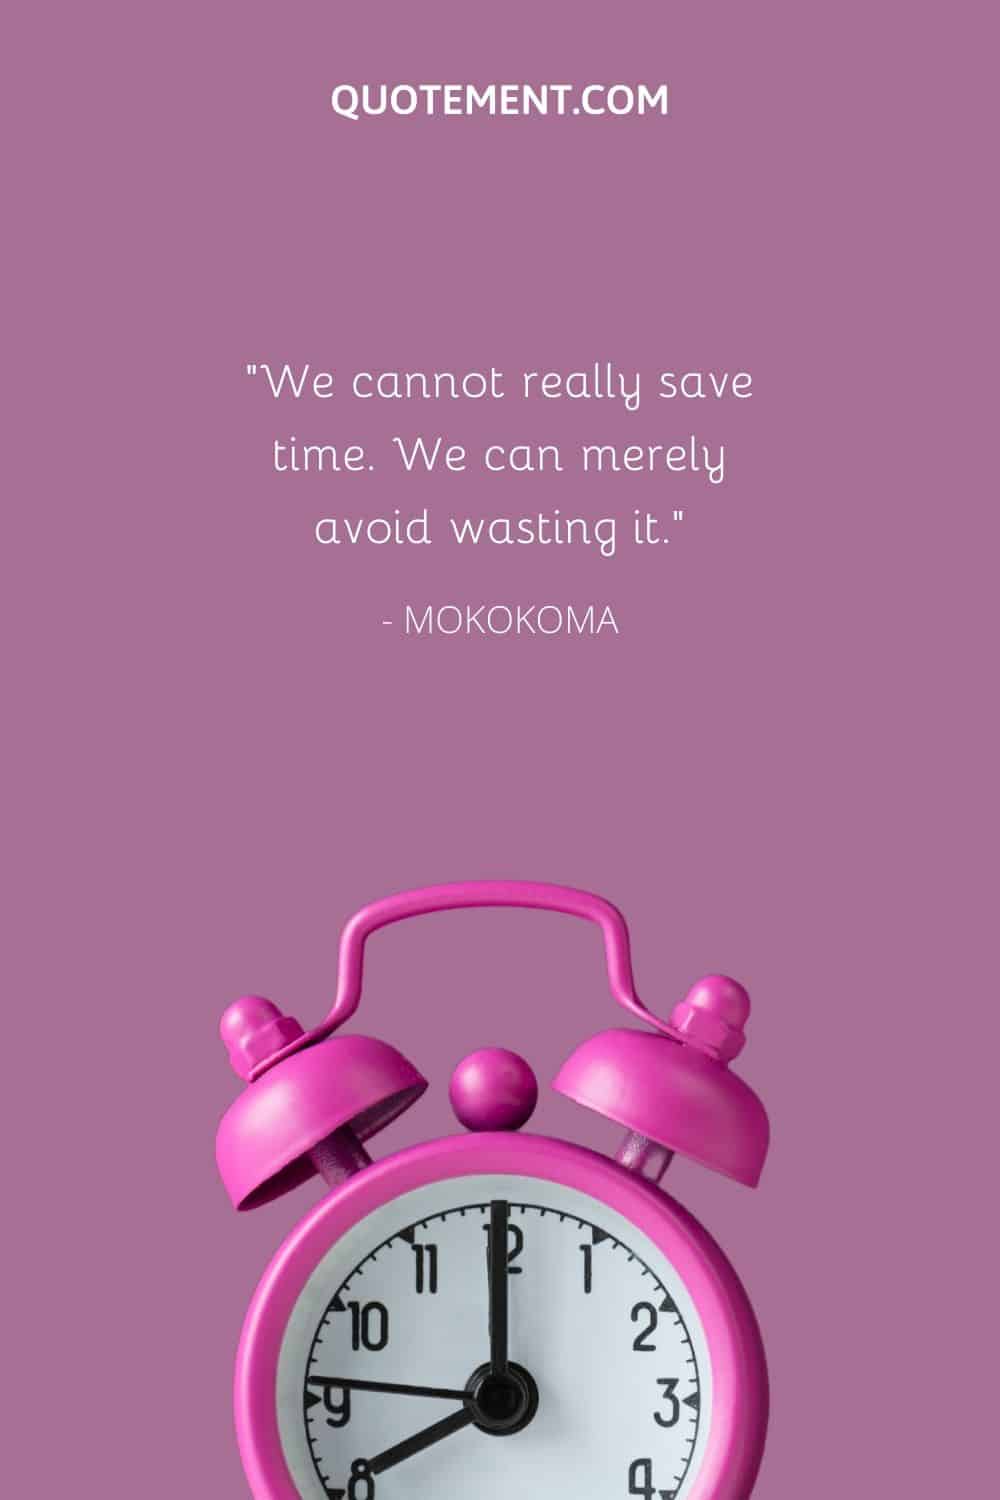 We cannot really save time. We can merely avoid wasting it